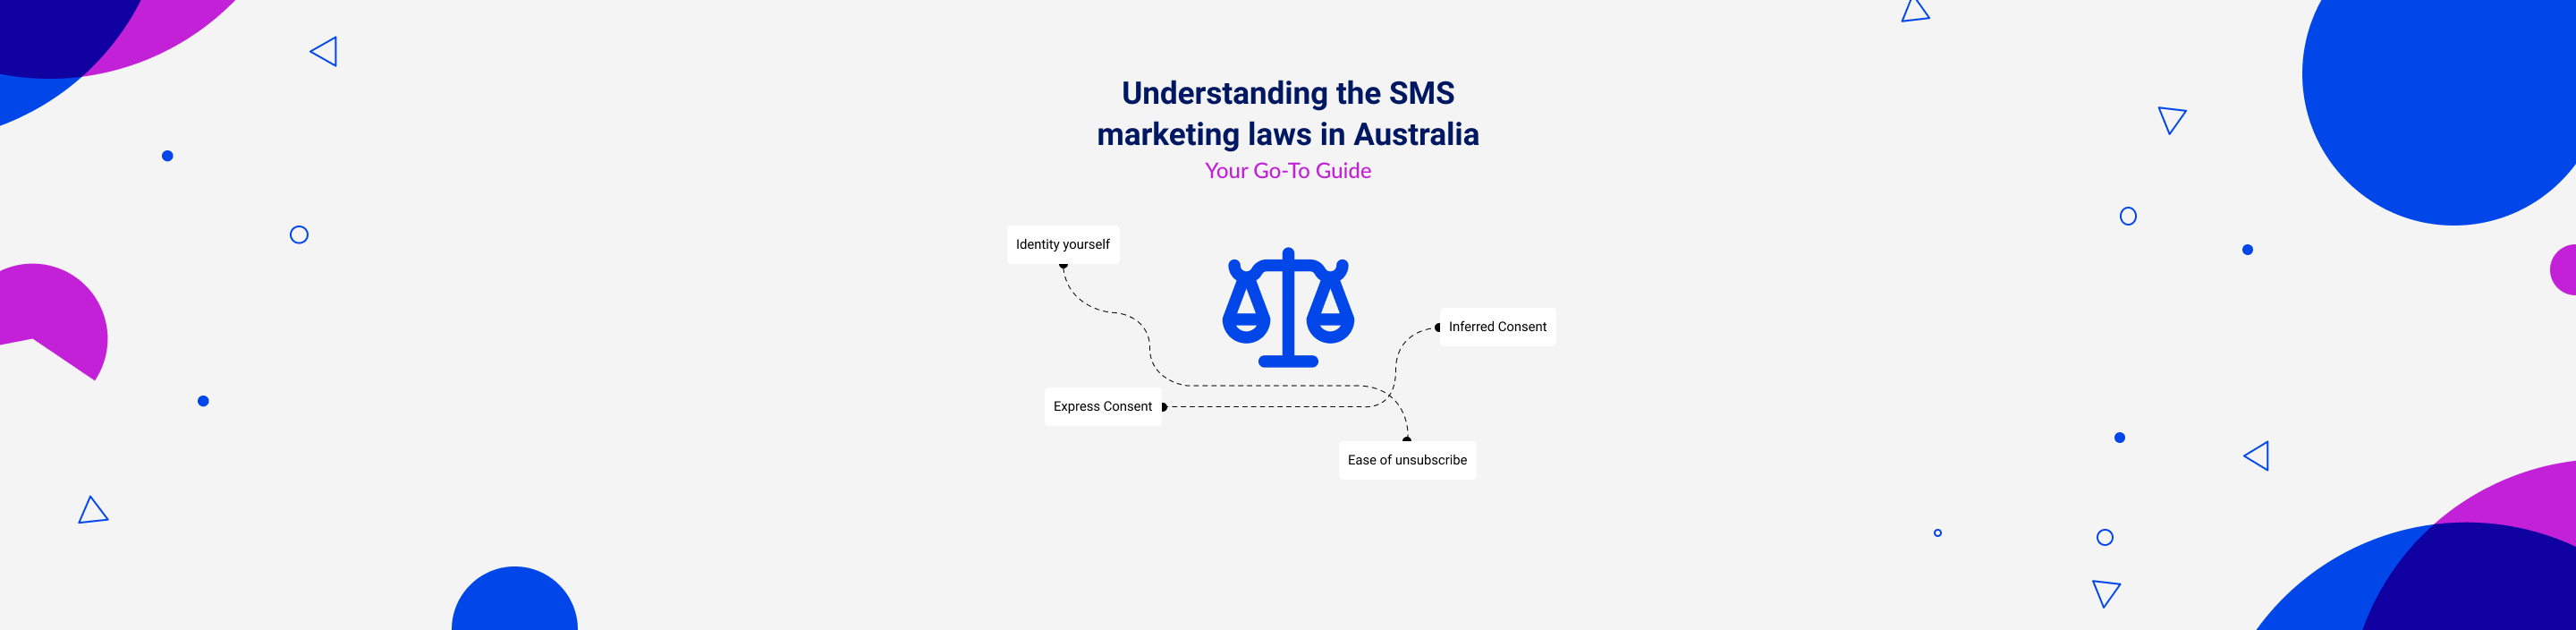 understanding-the-sms-marketing-laws-in-australia